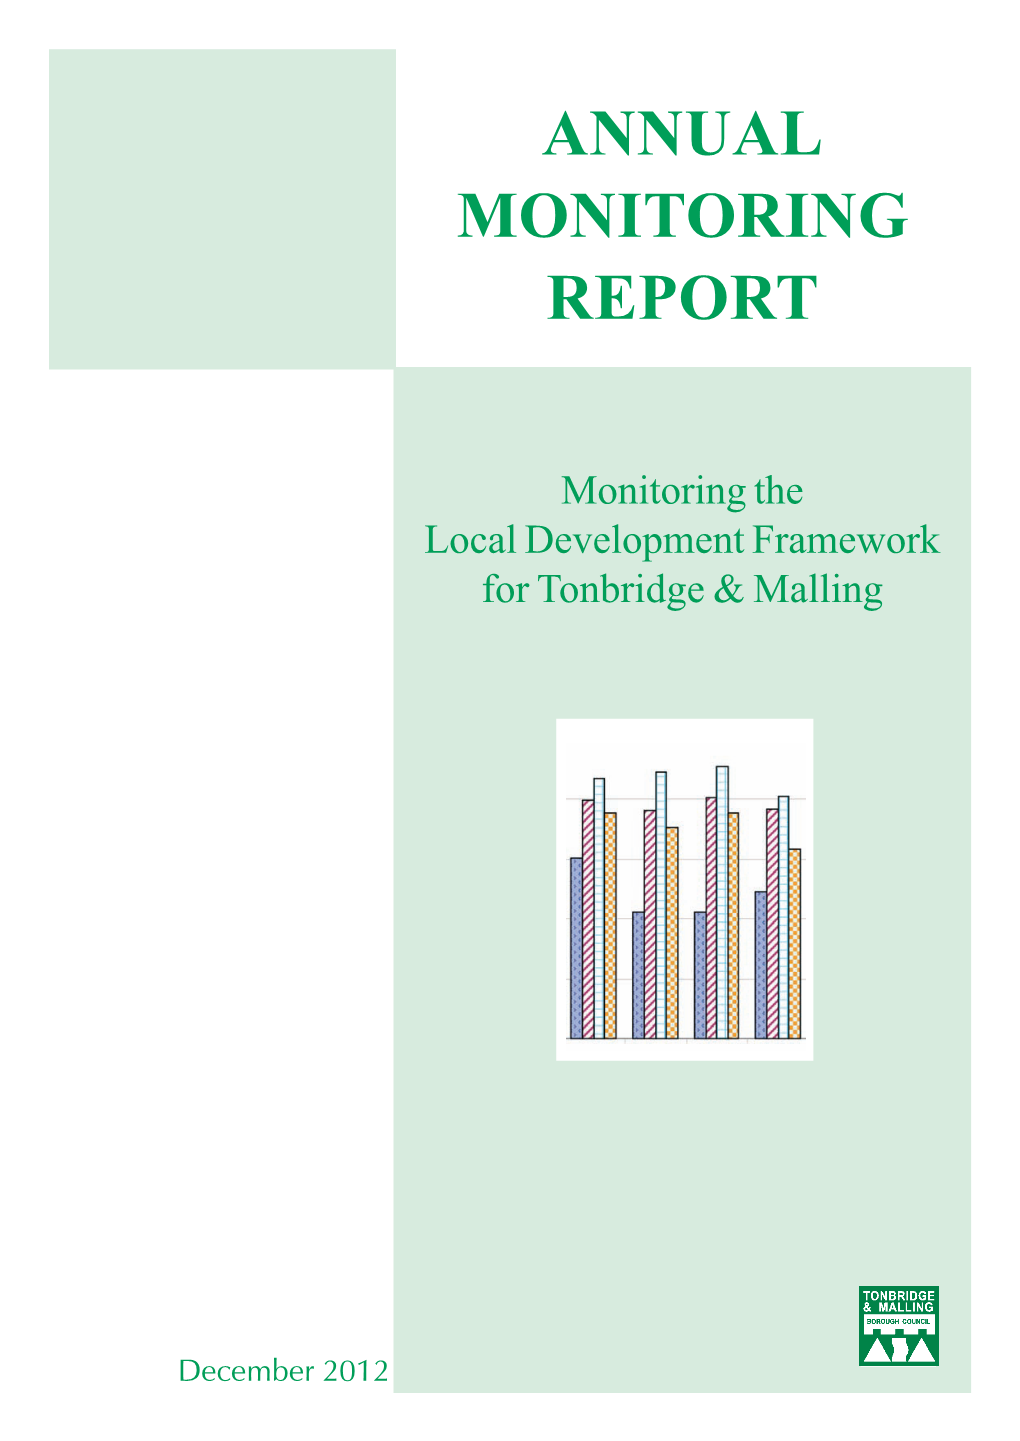 Download: Annual Monitoring Report